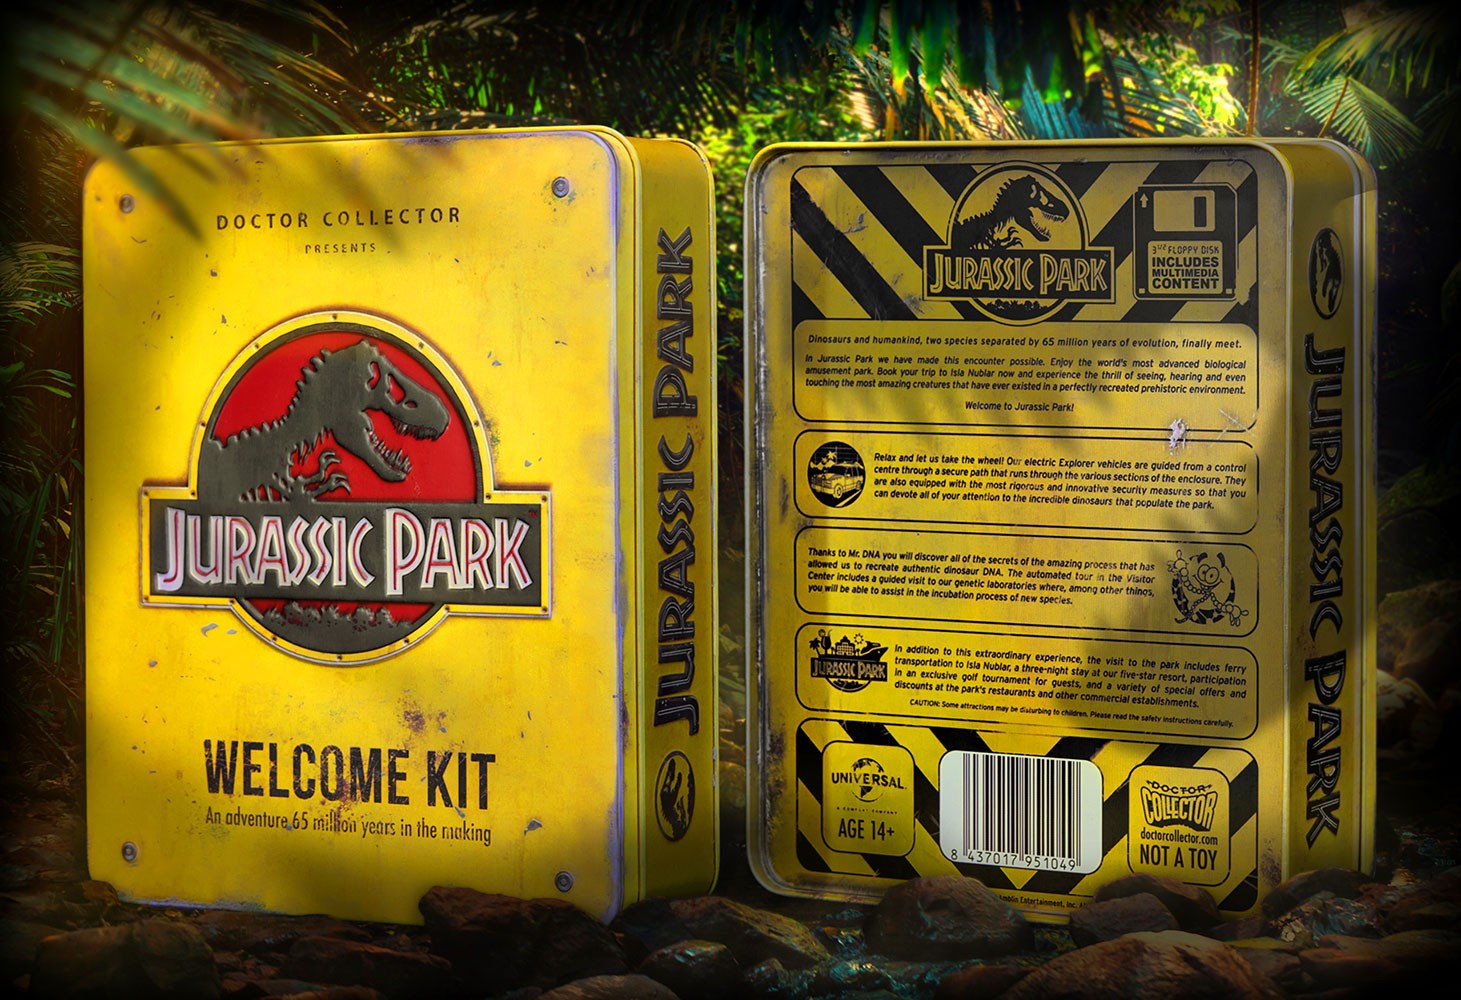 Jurassic Park Welcome Kit (Standard Edition) View 1